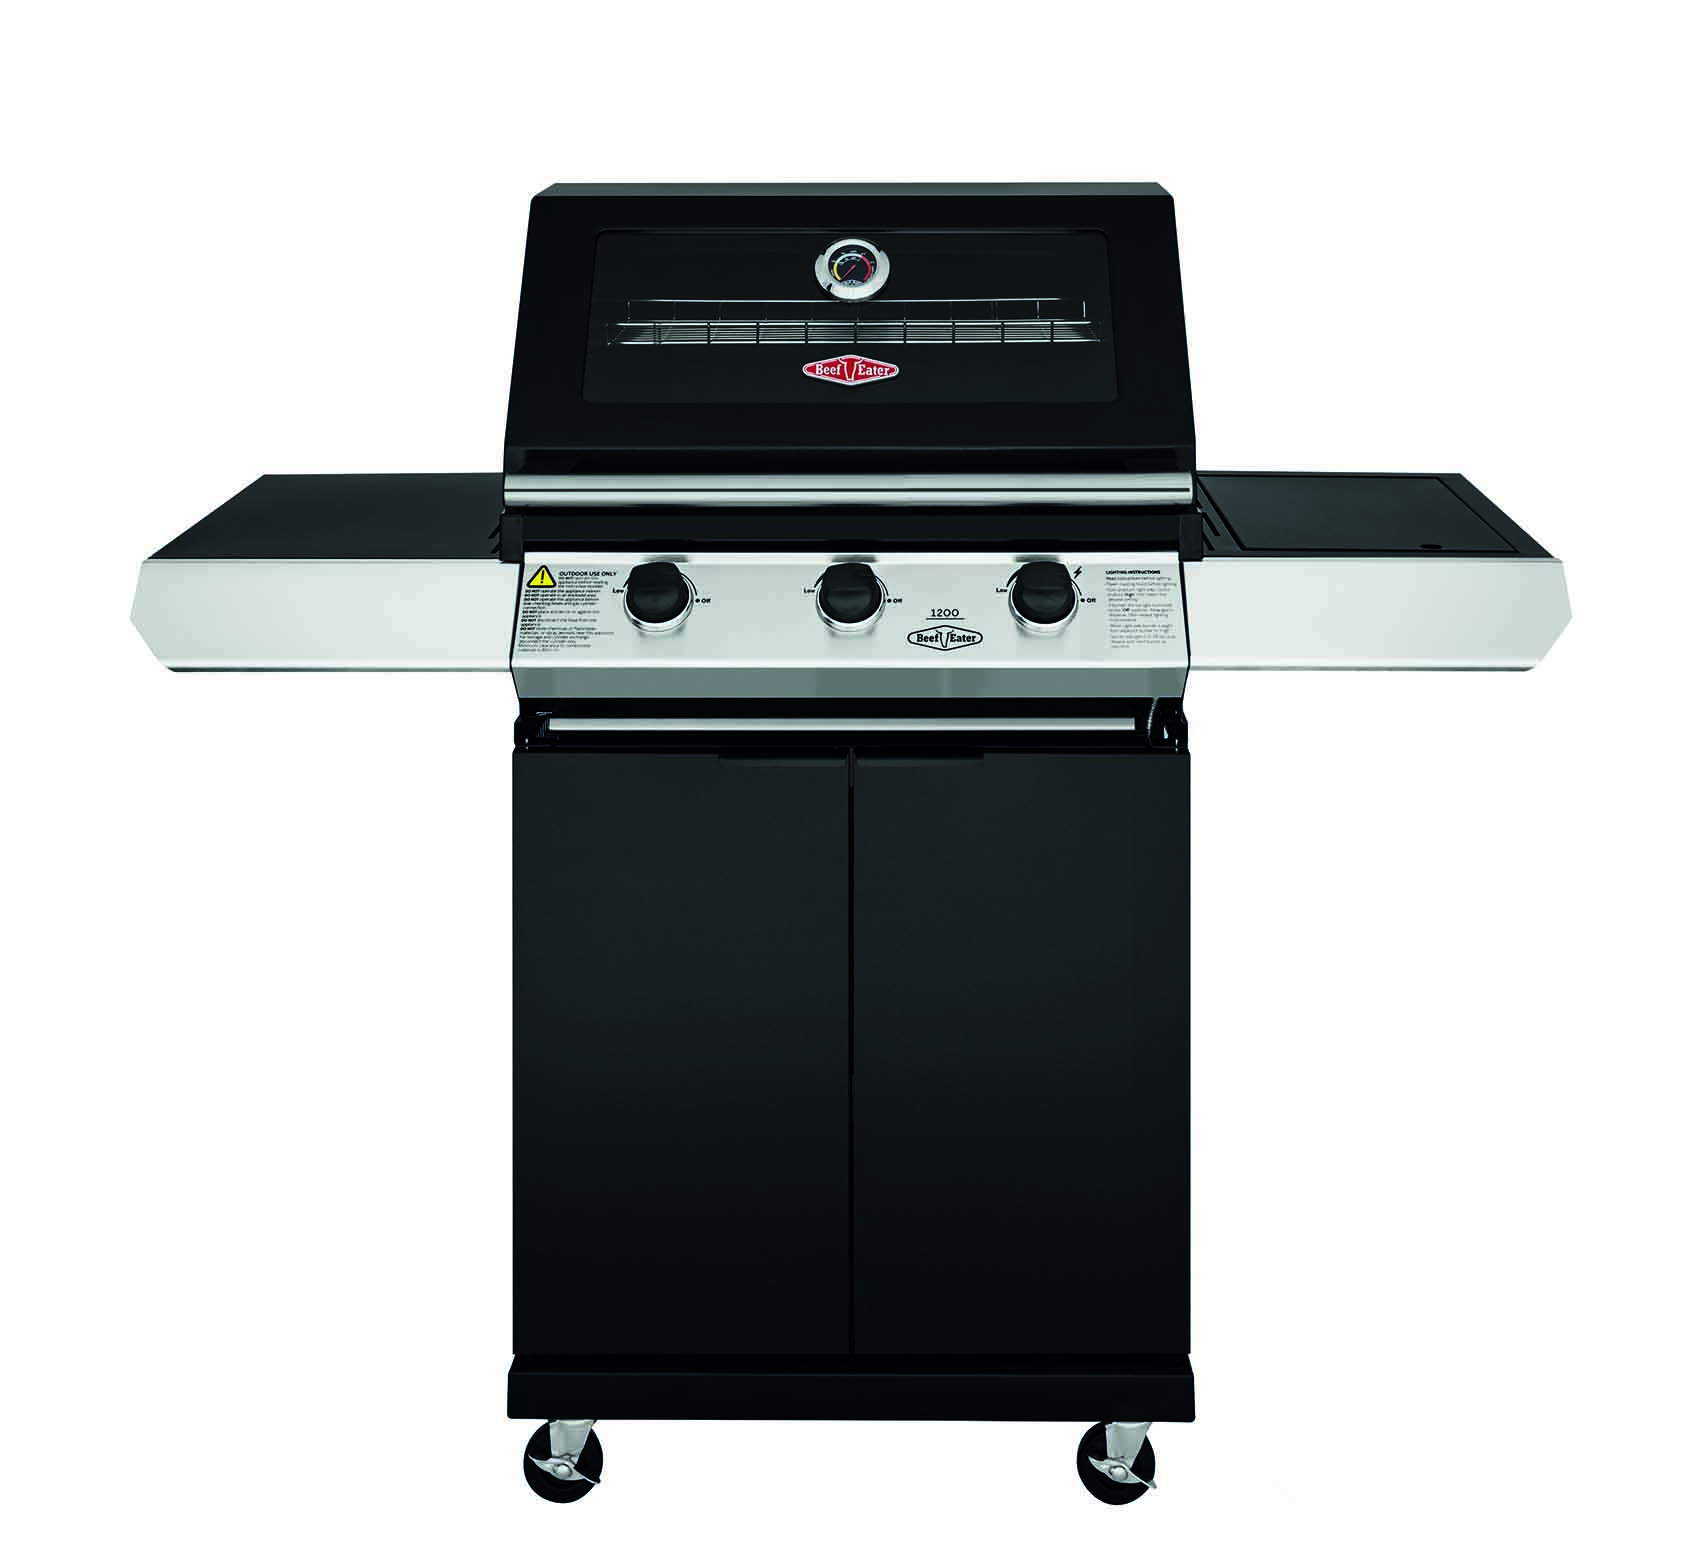 Beefeater 1200E Series - 3 burners black